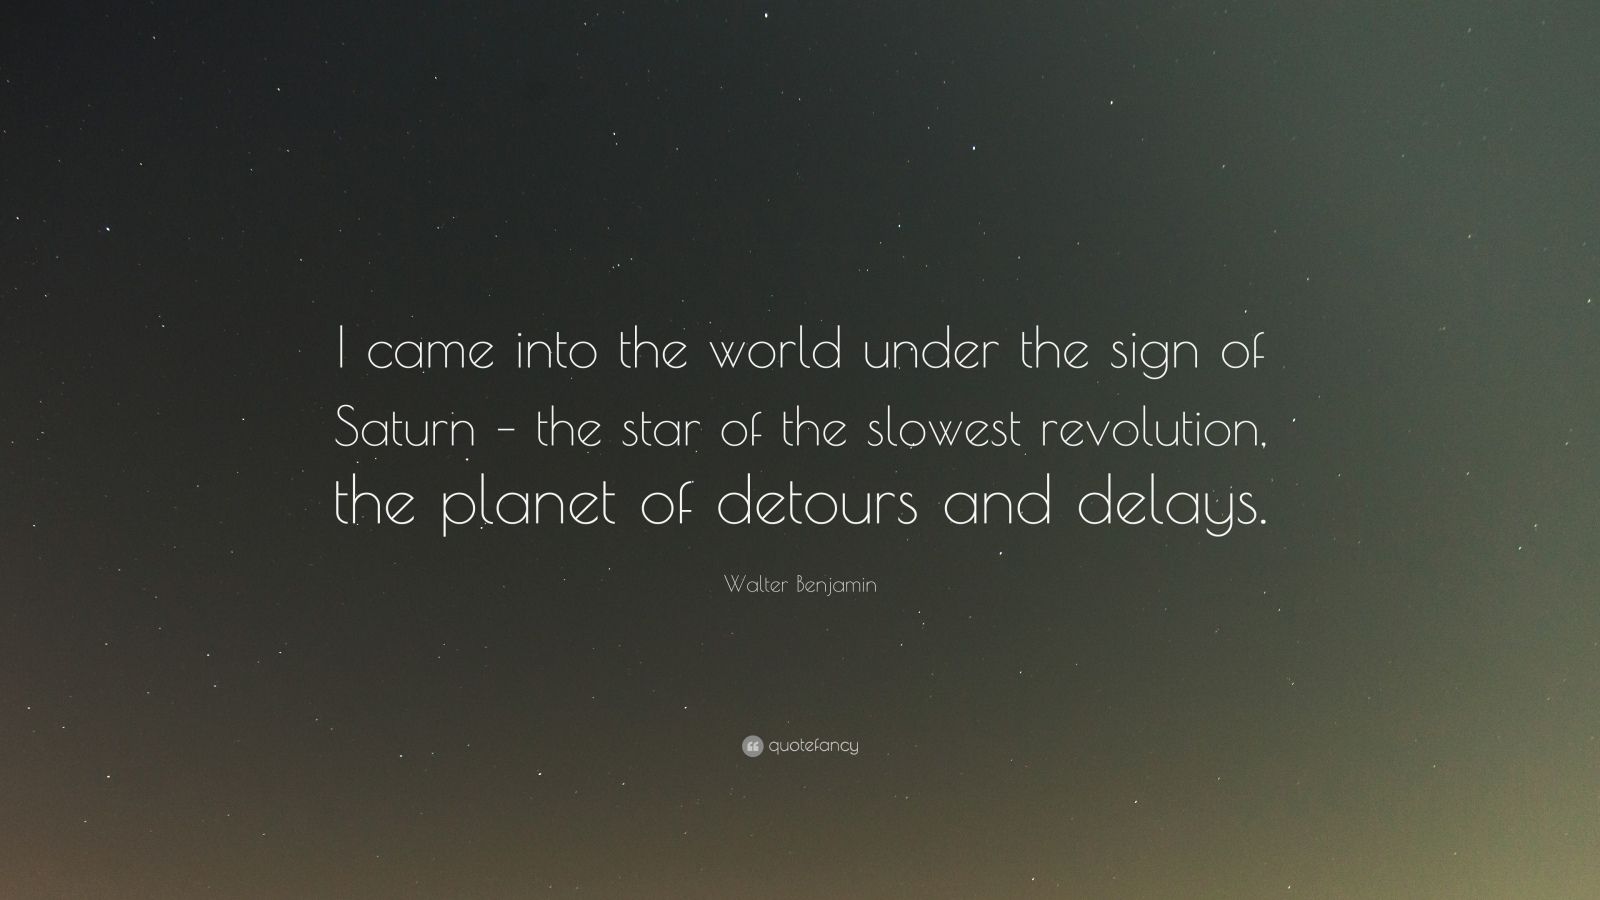 Walter Benjamin Quote: “I came into the world under the sign of Saturn